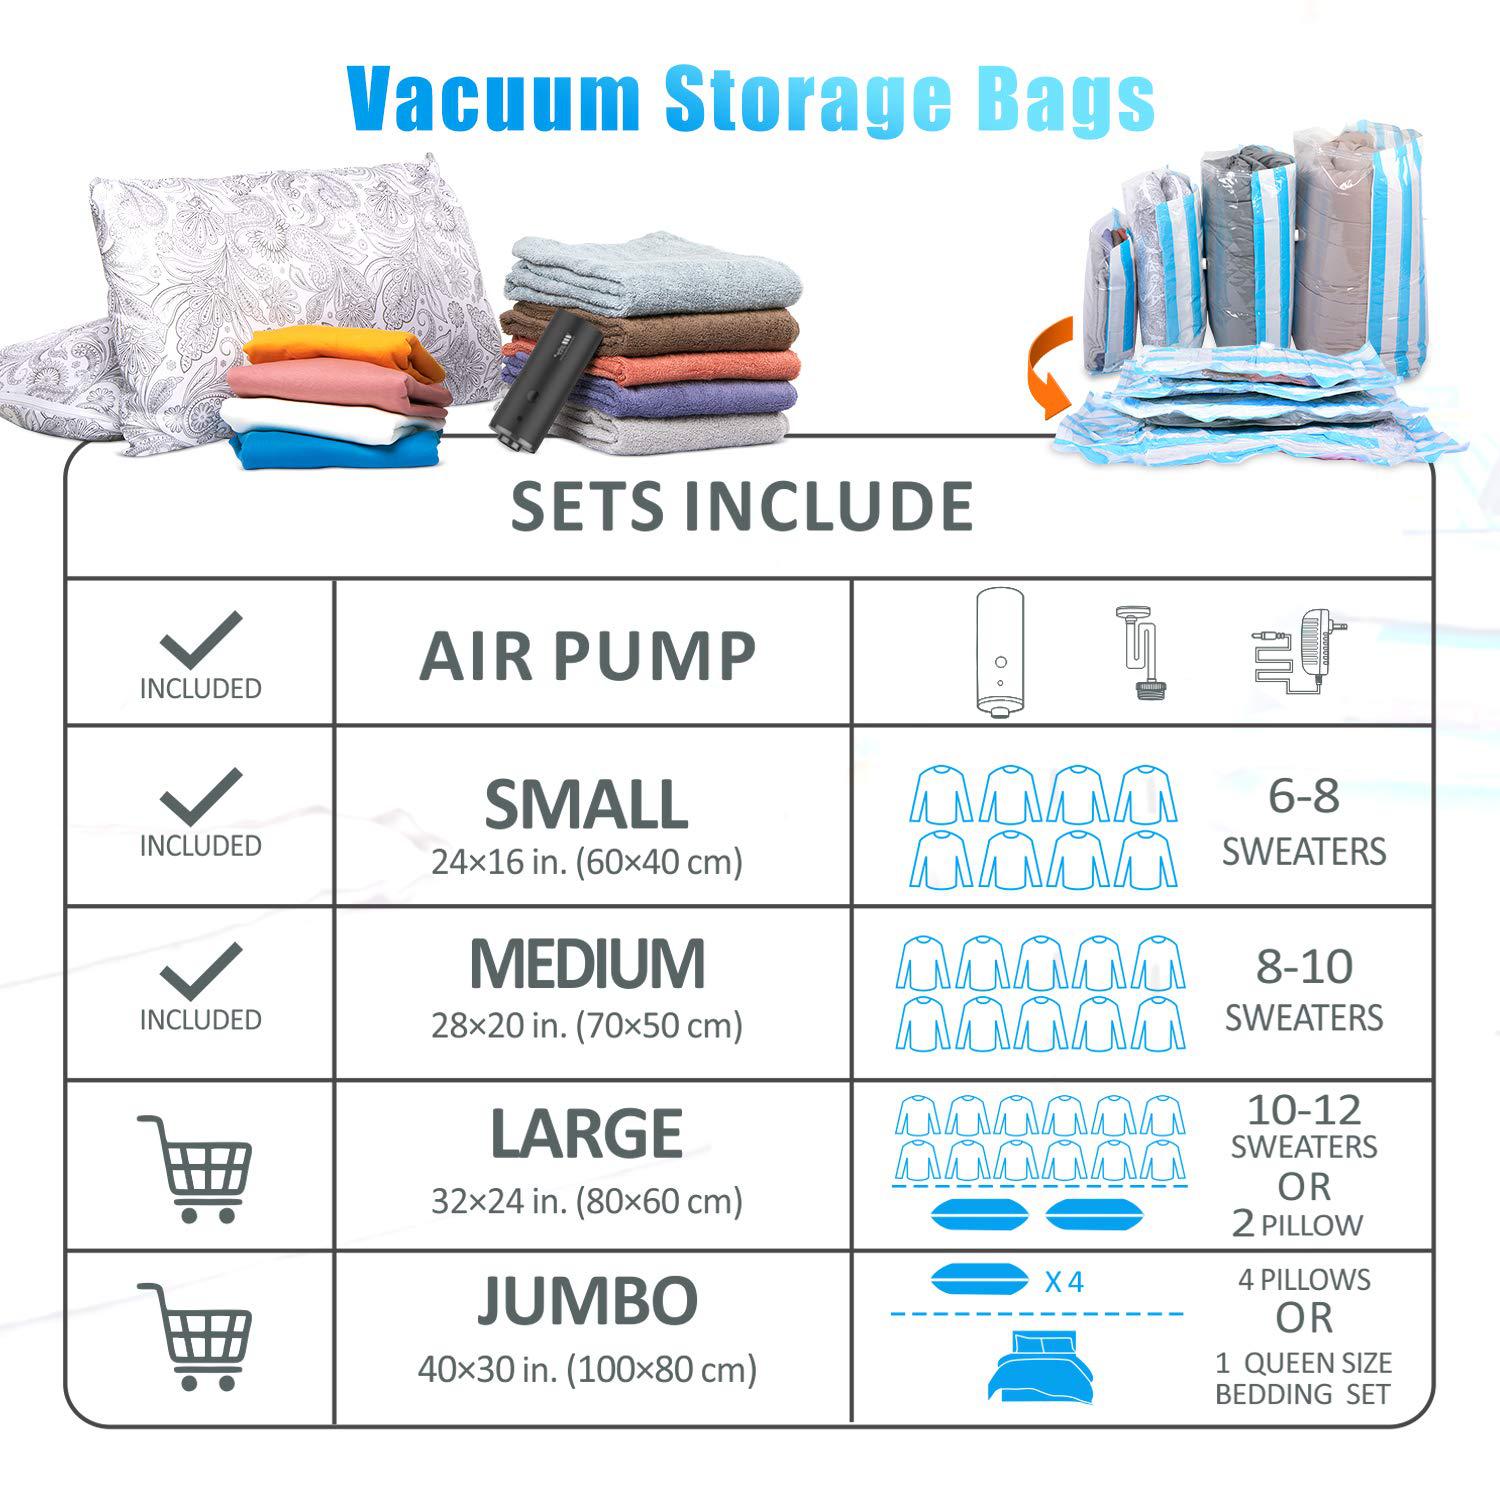 VMSTR vmstr travel vacuum storage bags with electric pump, medium small  space saver bags for travel and home use